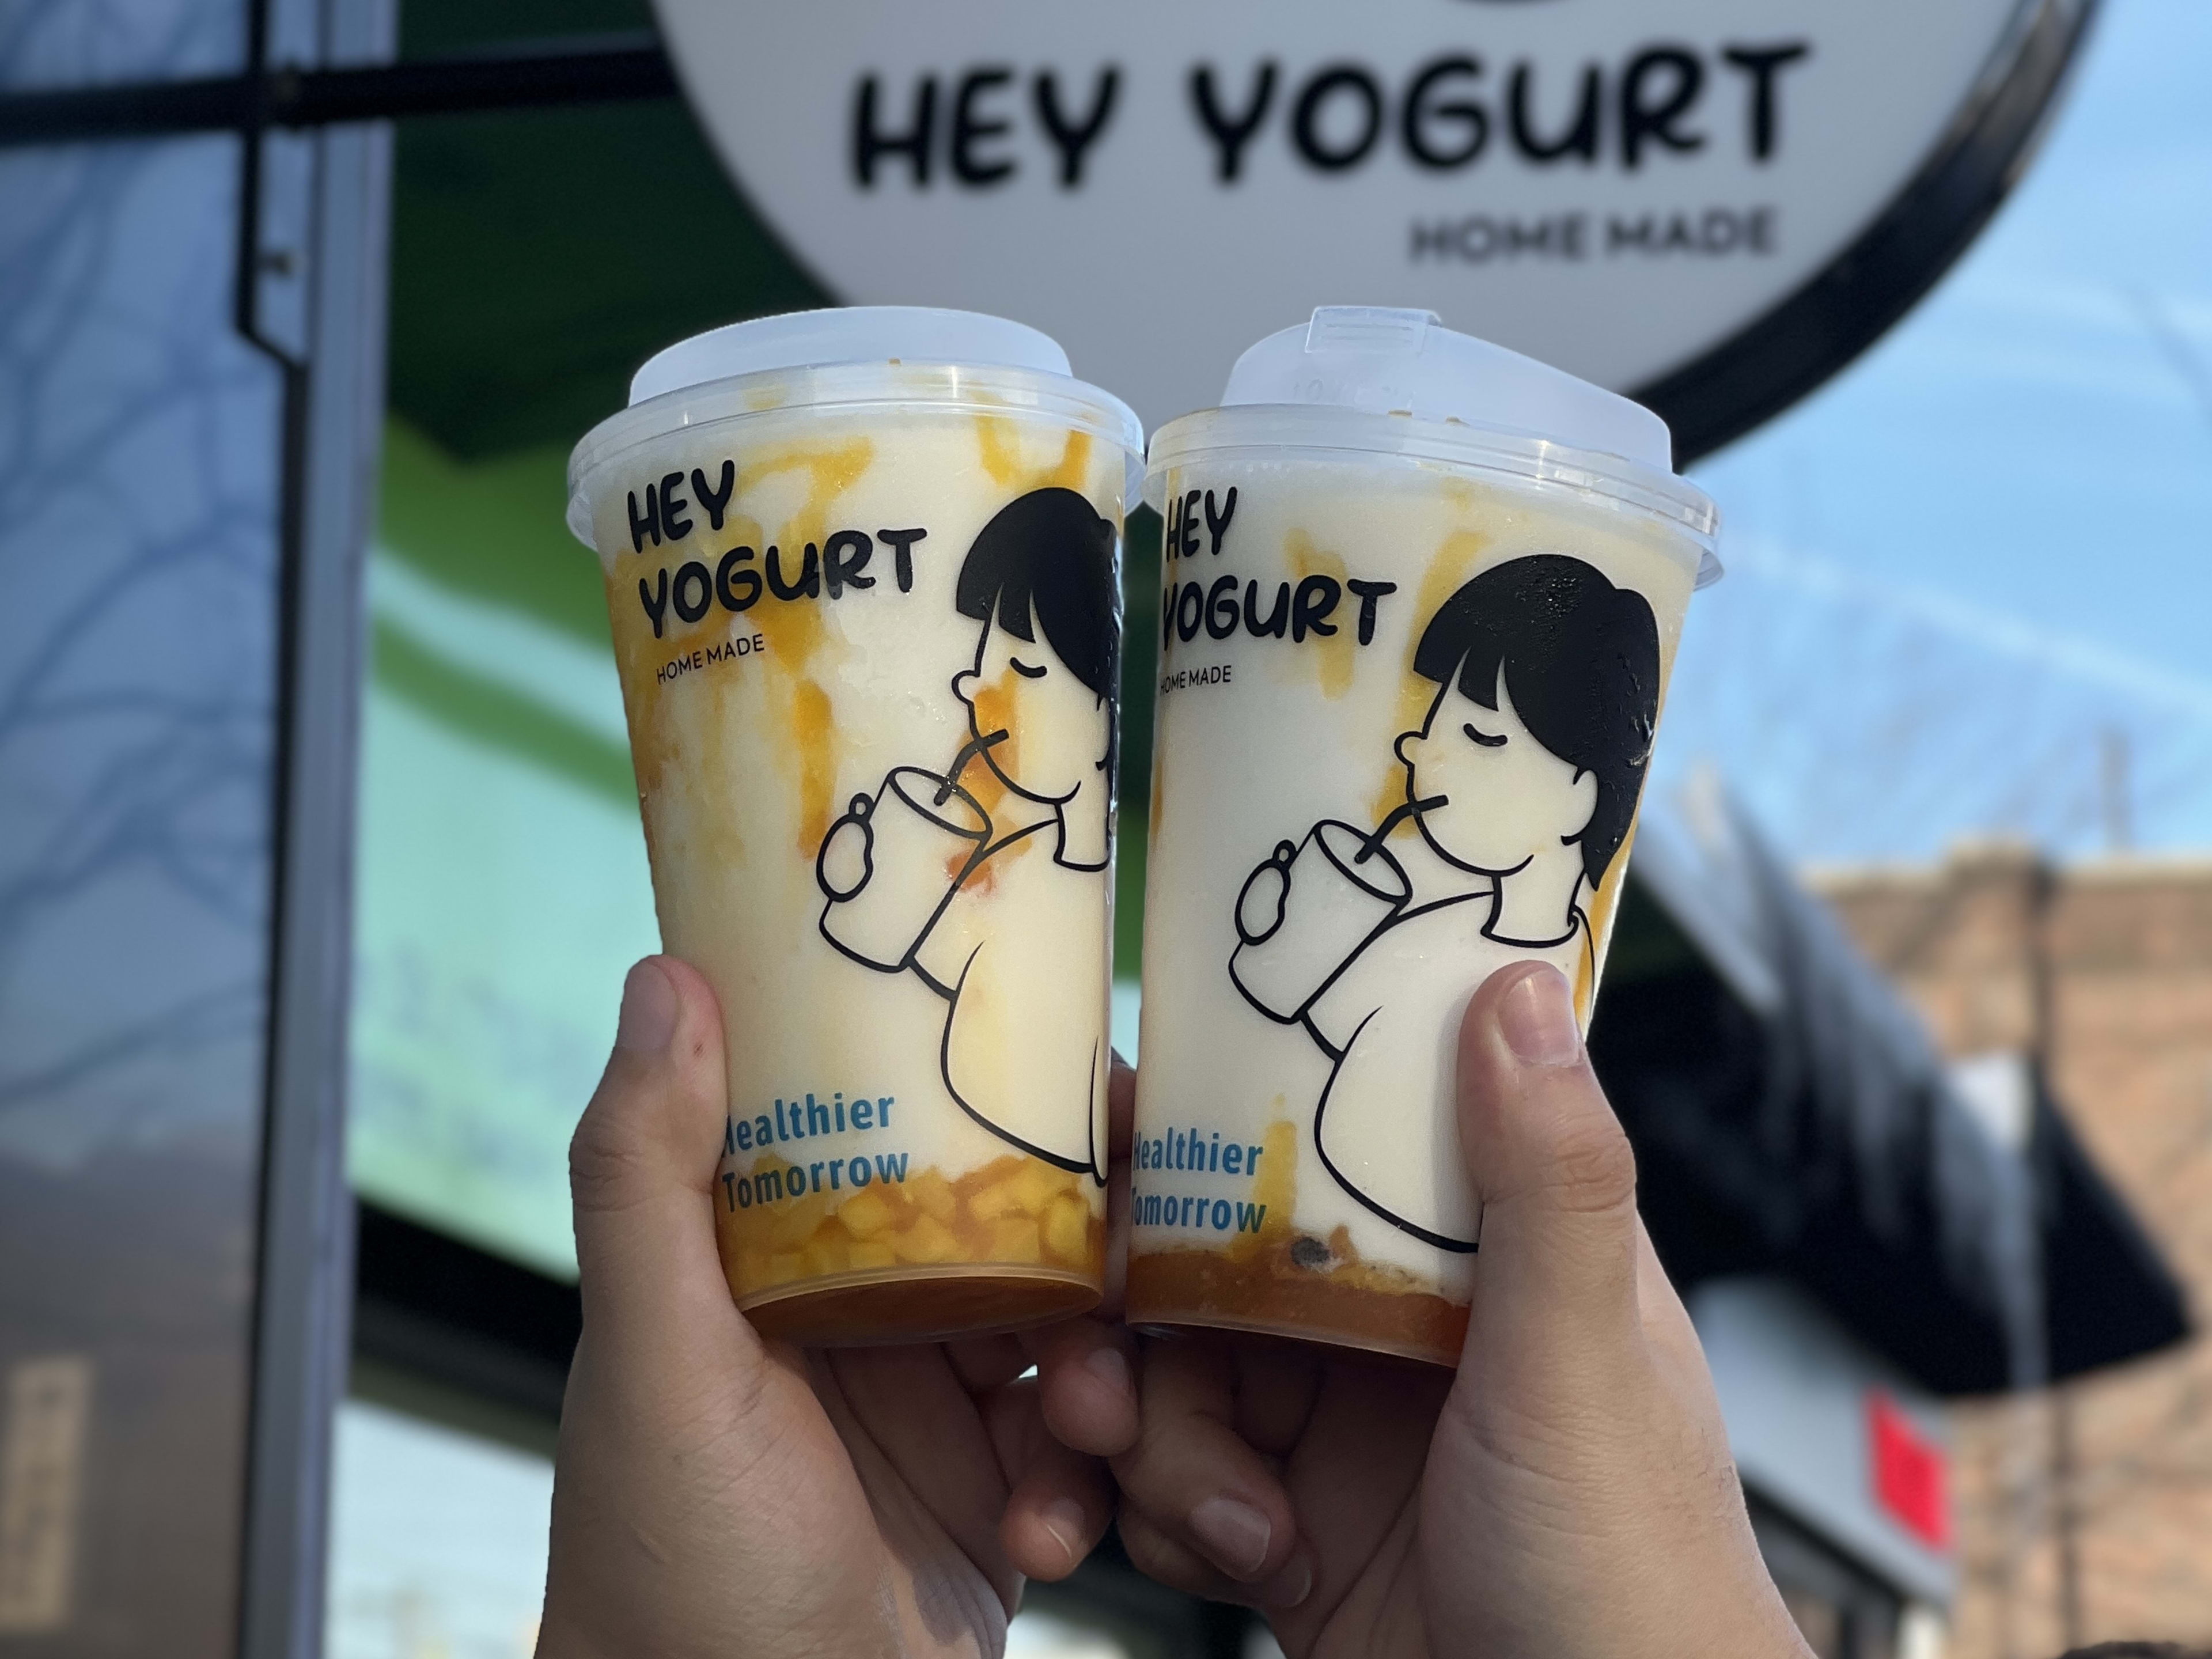 This is a picture are yogurt smoothies from Hey Yogurt.